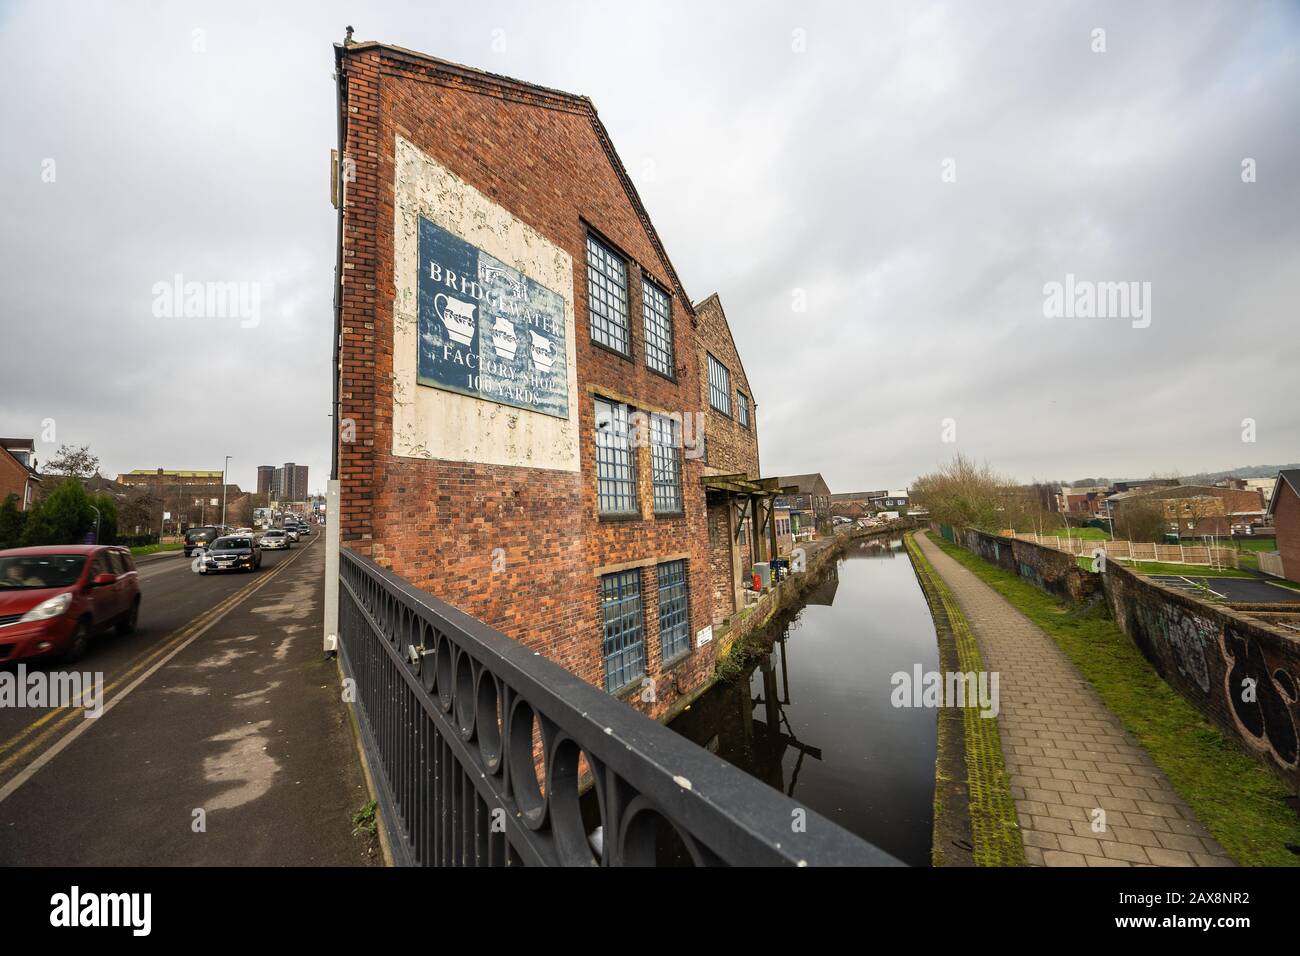 The famous Emma Bridgewater pottery factory located on Victoria road, Vicky road, Lichfied street, creators of handmade pottery, bottle kilns Stock Photo